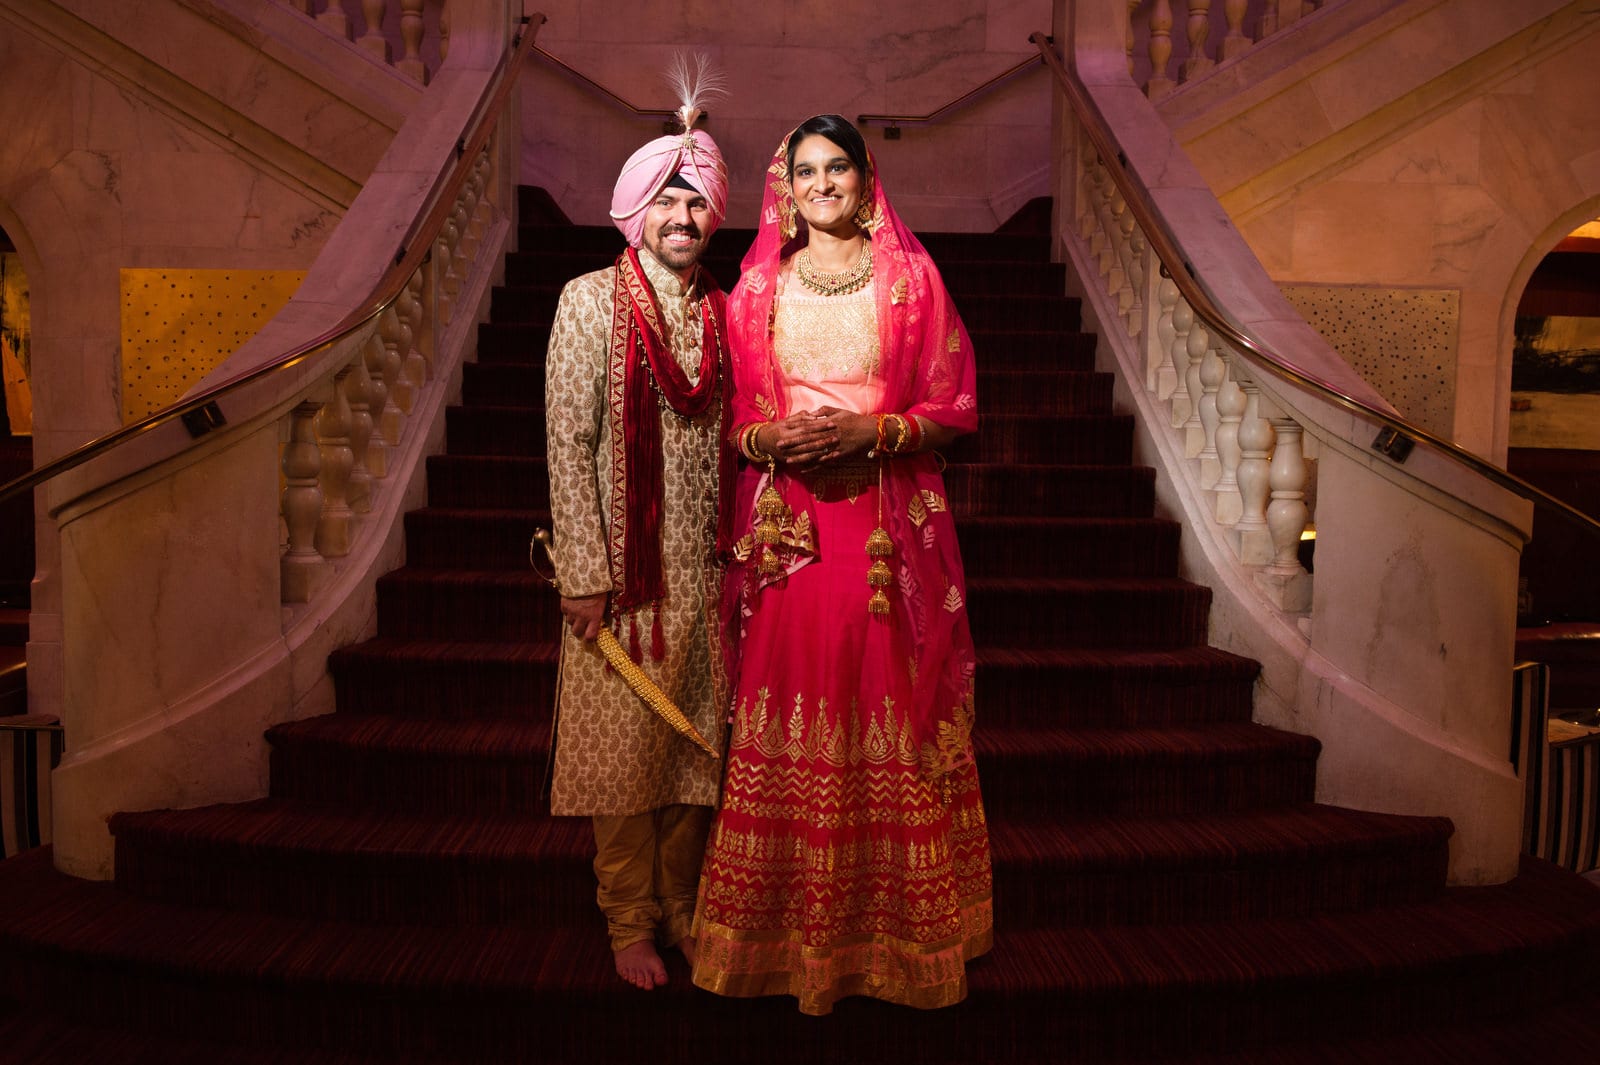 A groom wearing a gold kaftan and pink turban holds a sword while standing with his bride who is wearing a red and gold sari after their Renaissance Phipps South Asian Wedding.